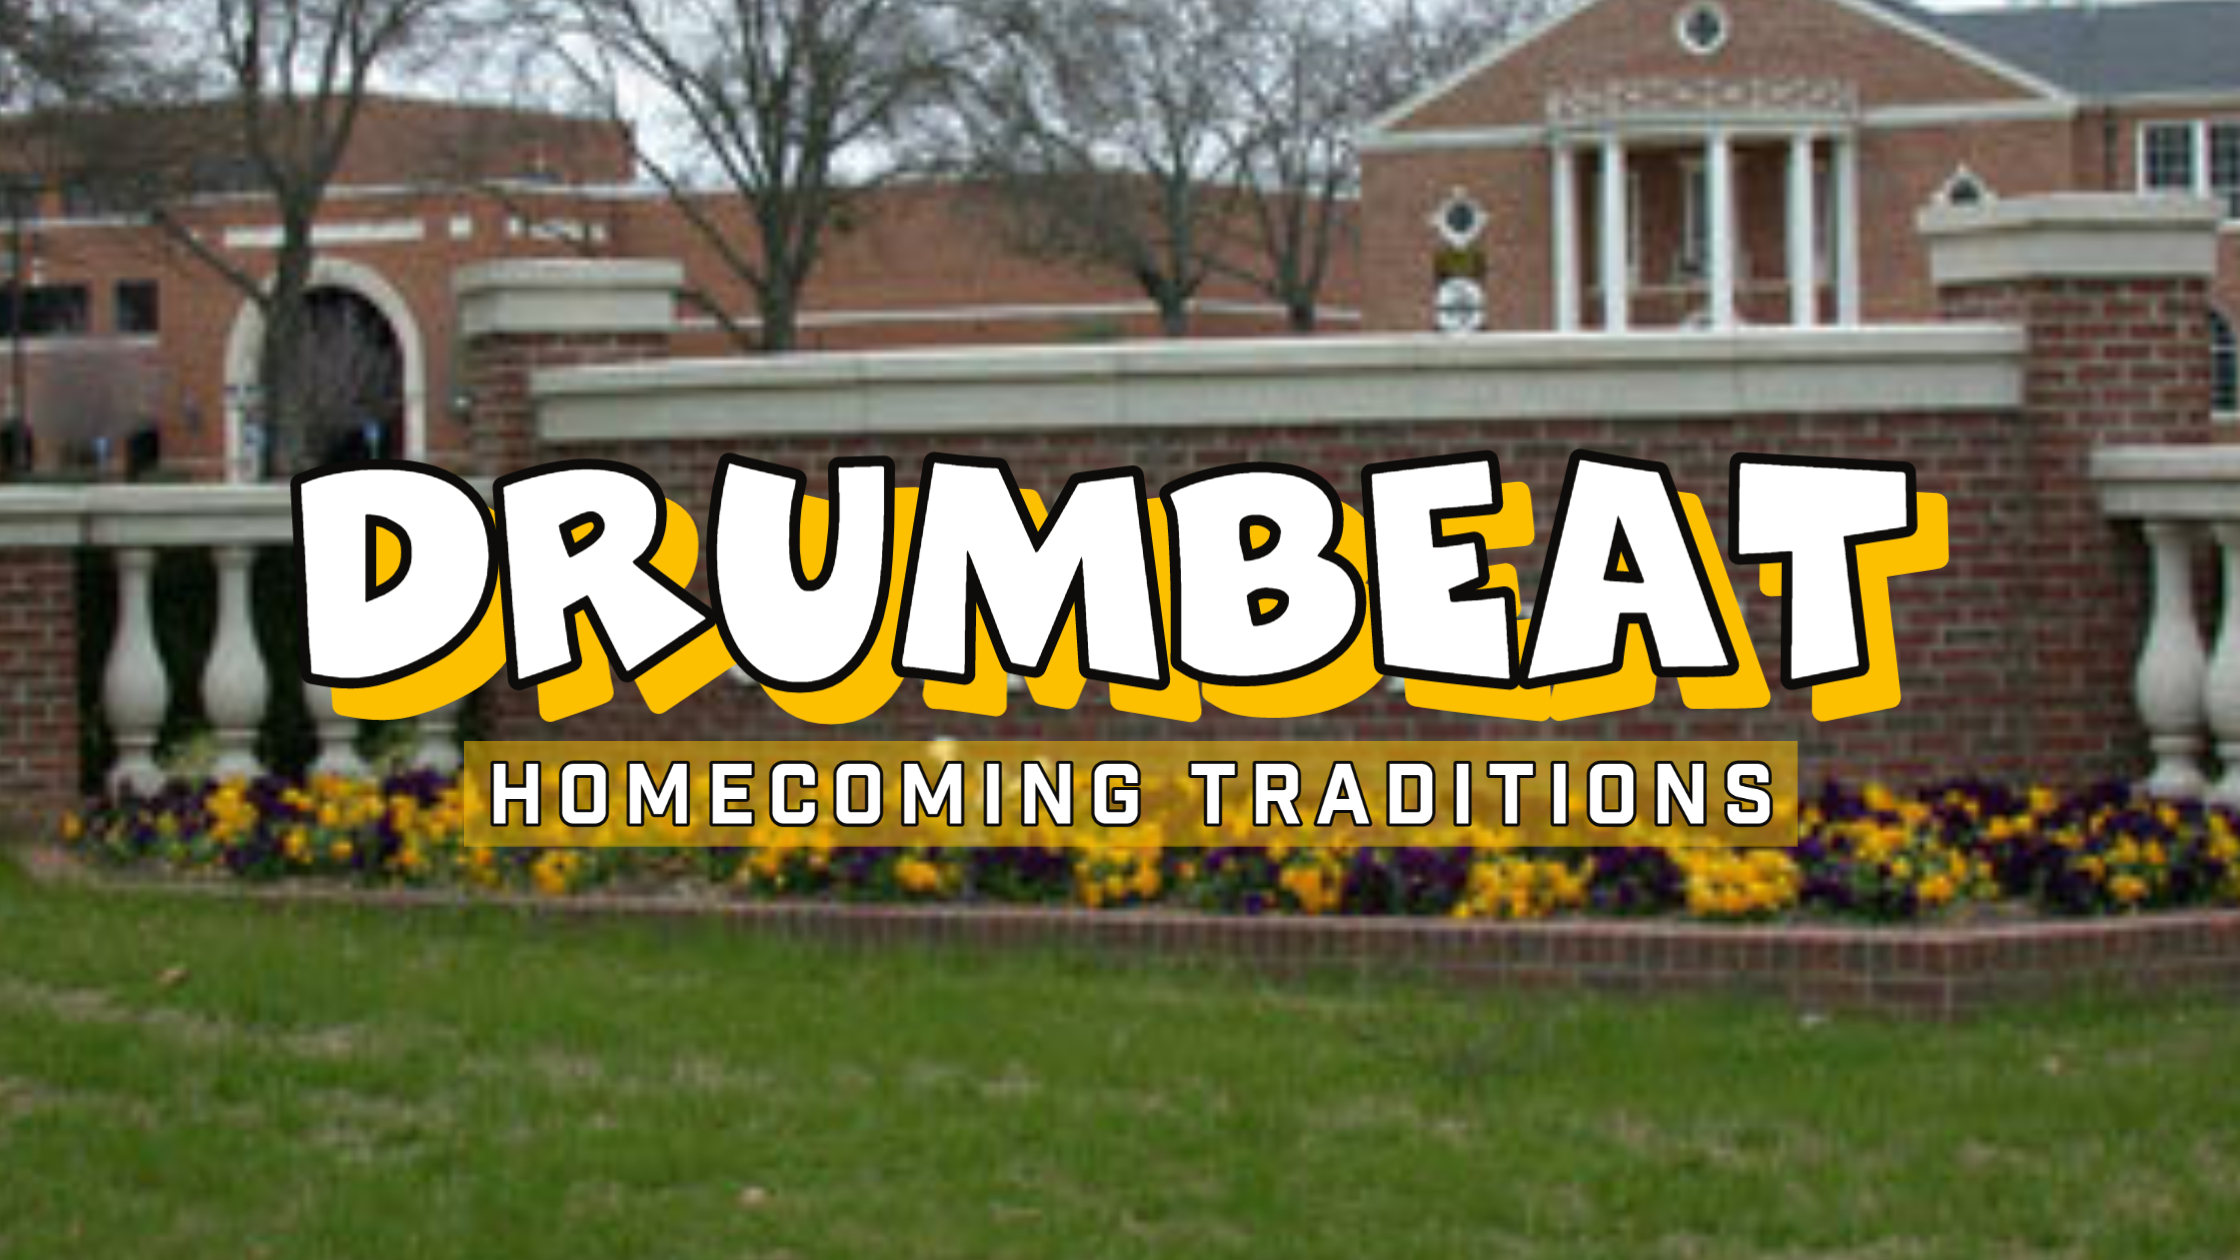 Homecoming traditions - Drumbeat